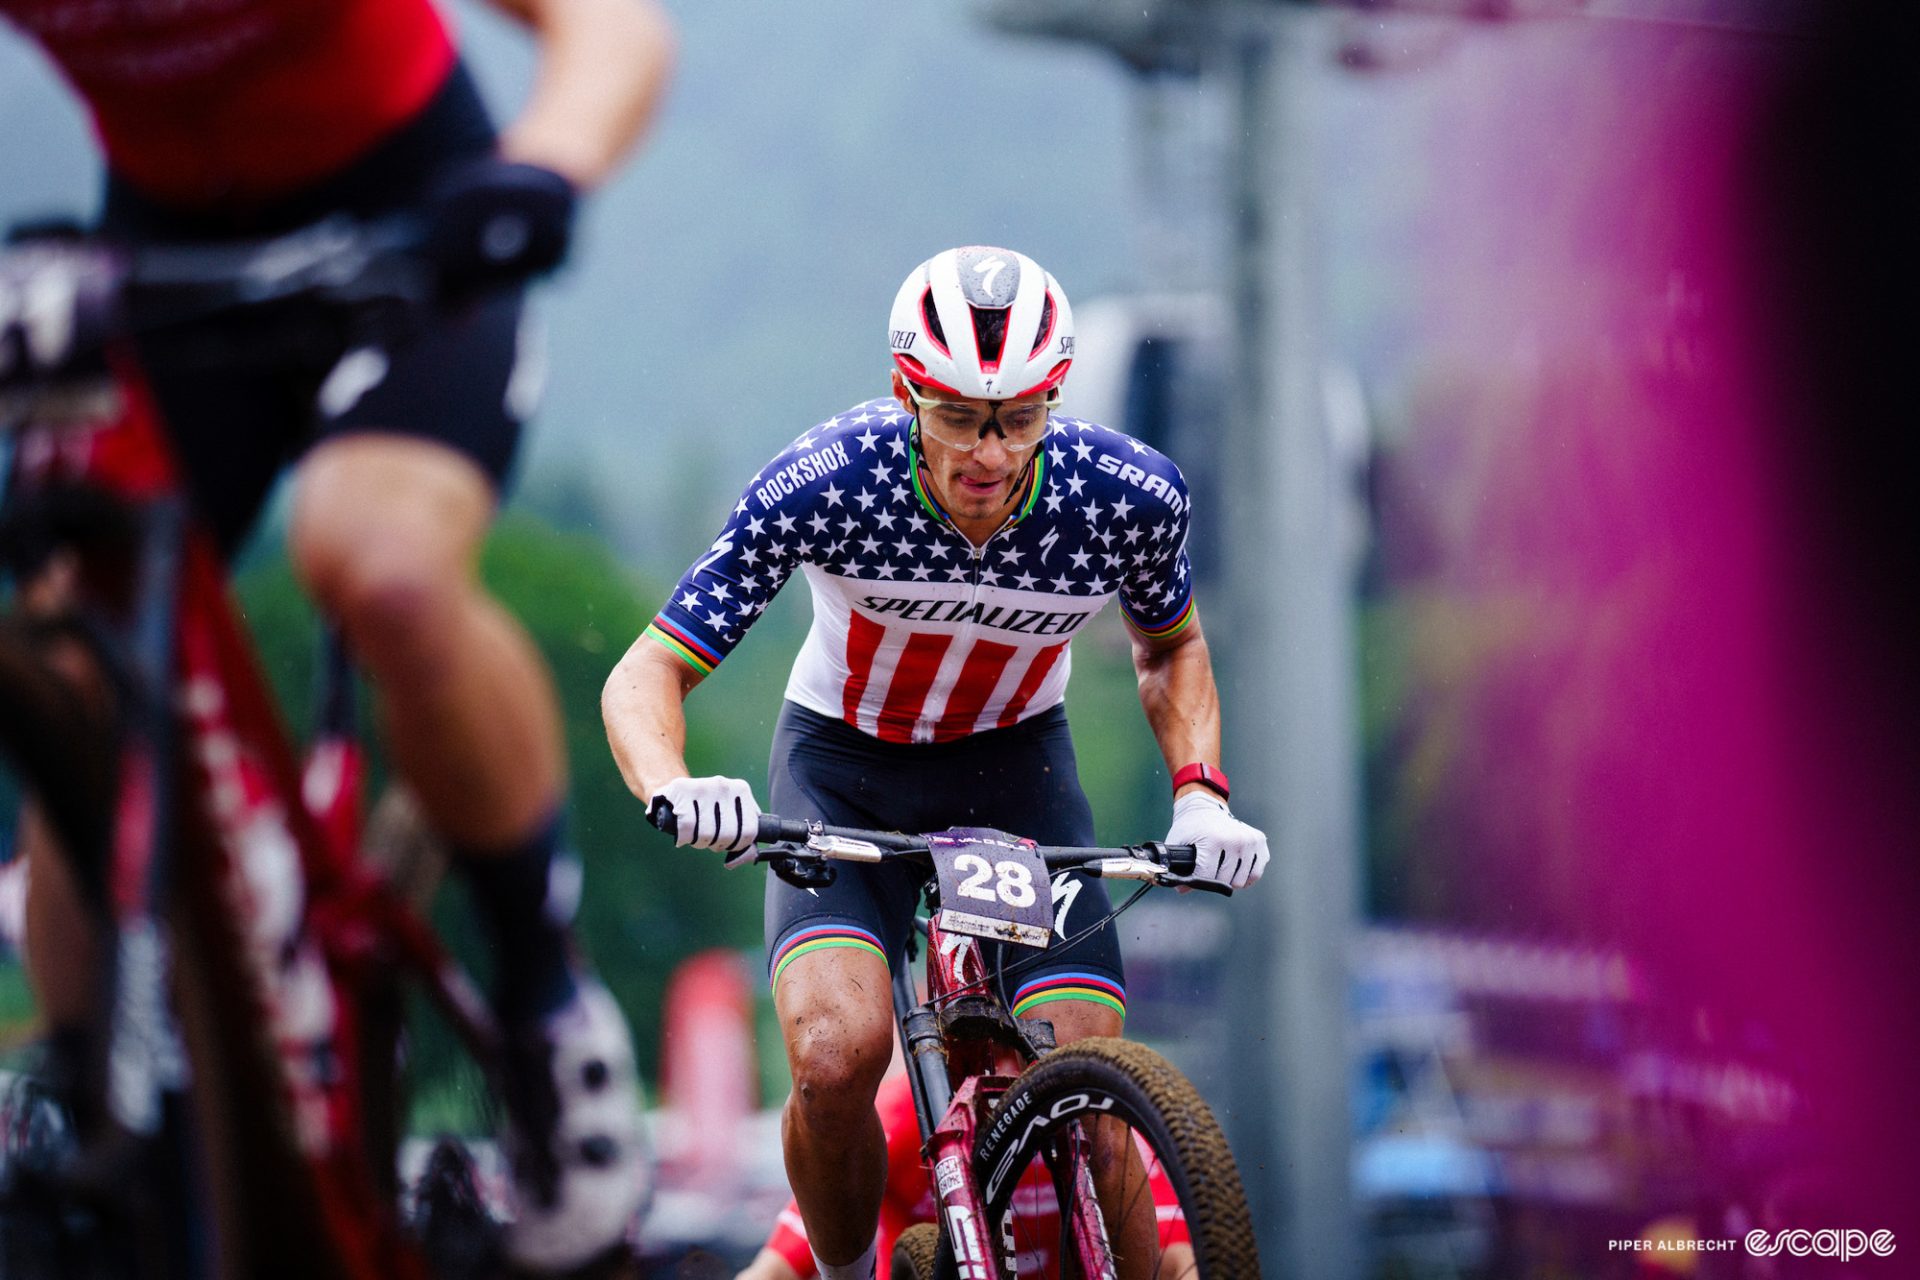 Chris Blevins races in a World Cup in Europe. He's focusing on a technical bit of trail, looking down, and is wearing the stars-and-strips jersey of national champion, with rainbow bands at his sleeves and short cuffs to honor his short-track World Championship in 2021.